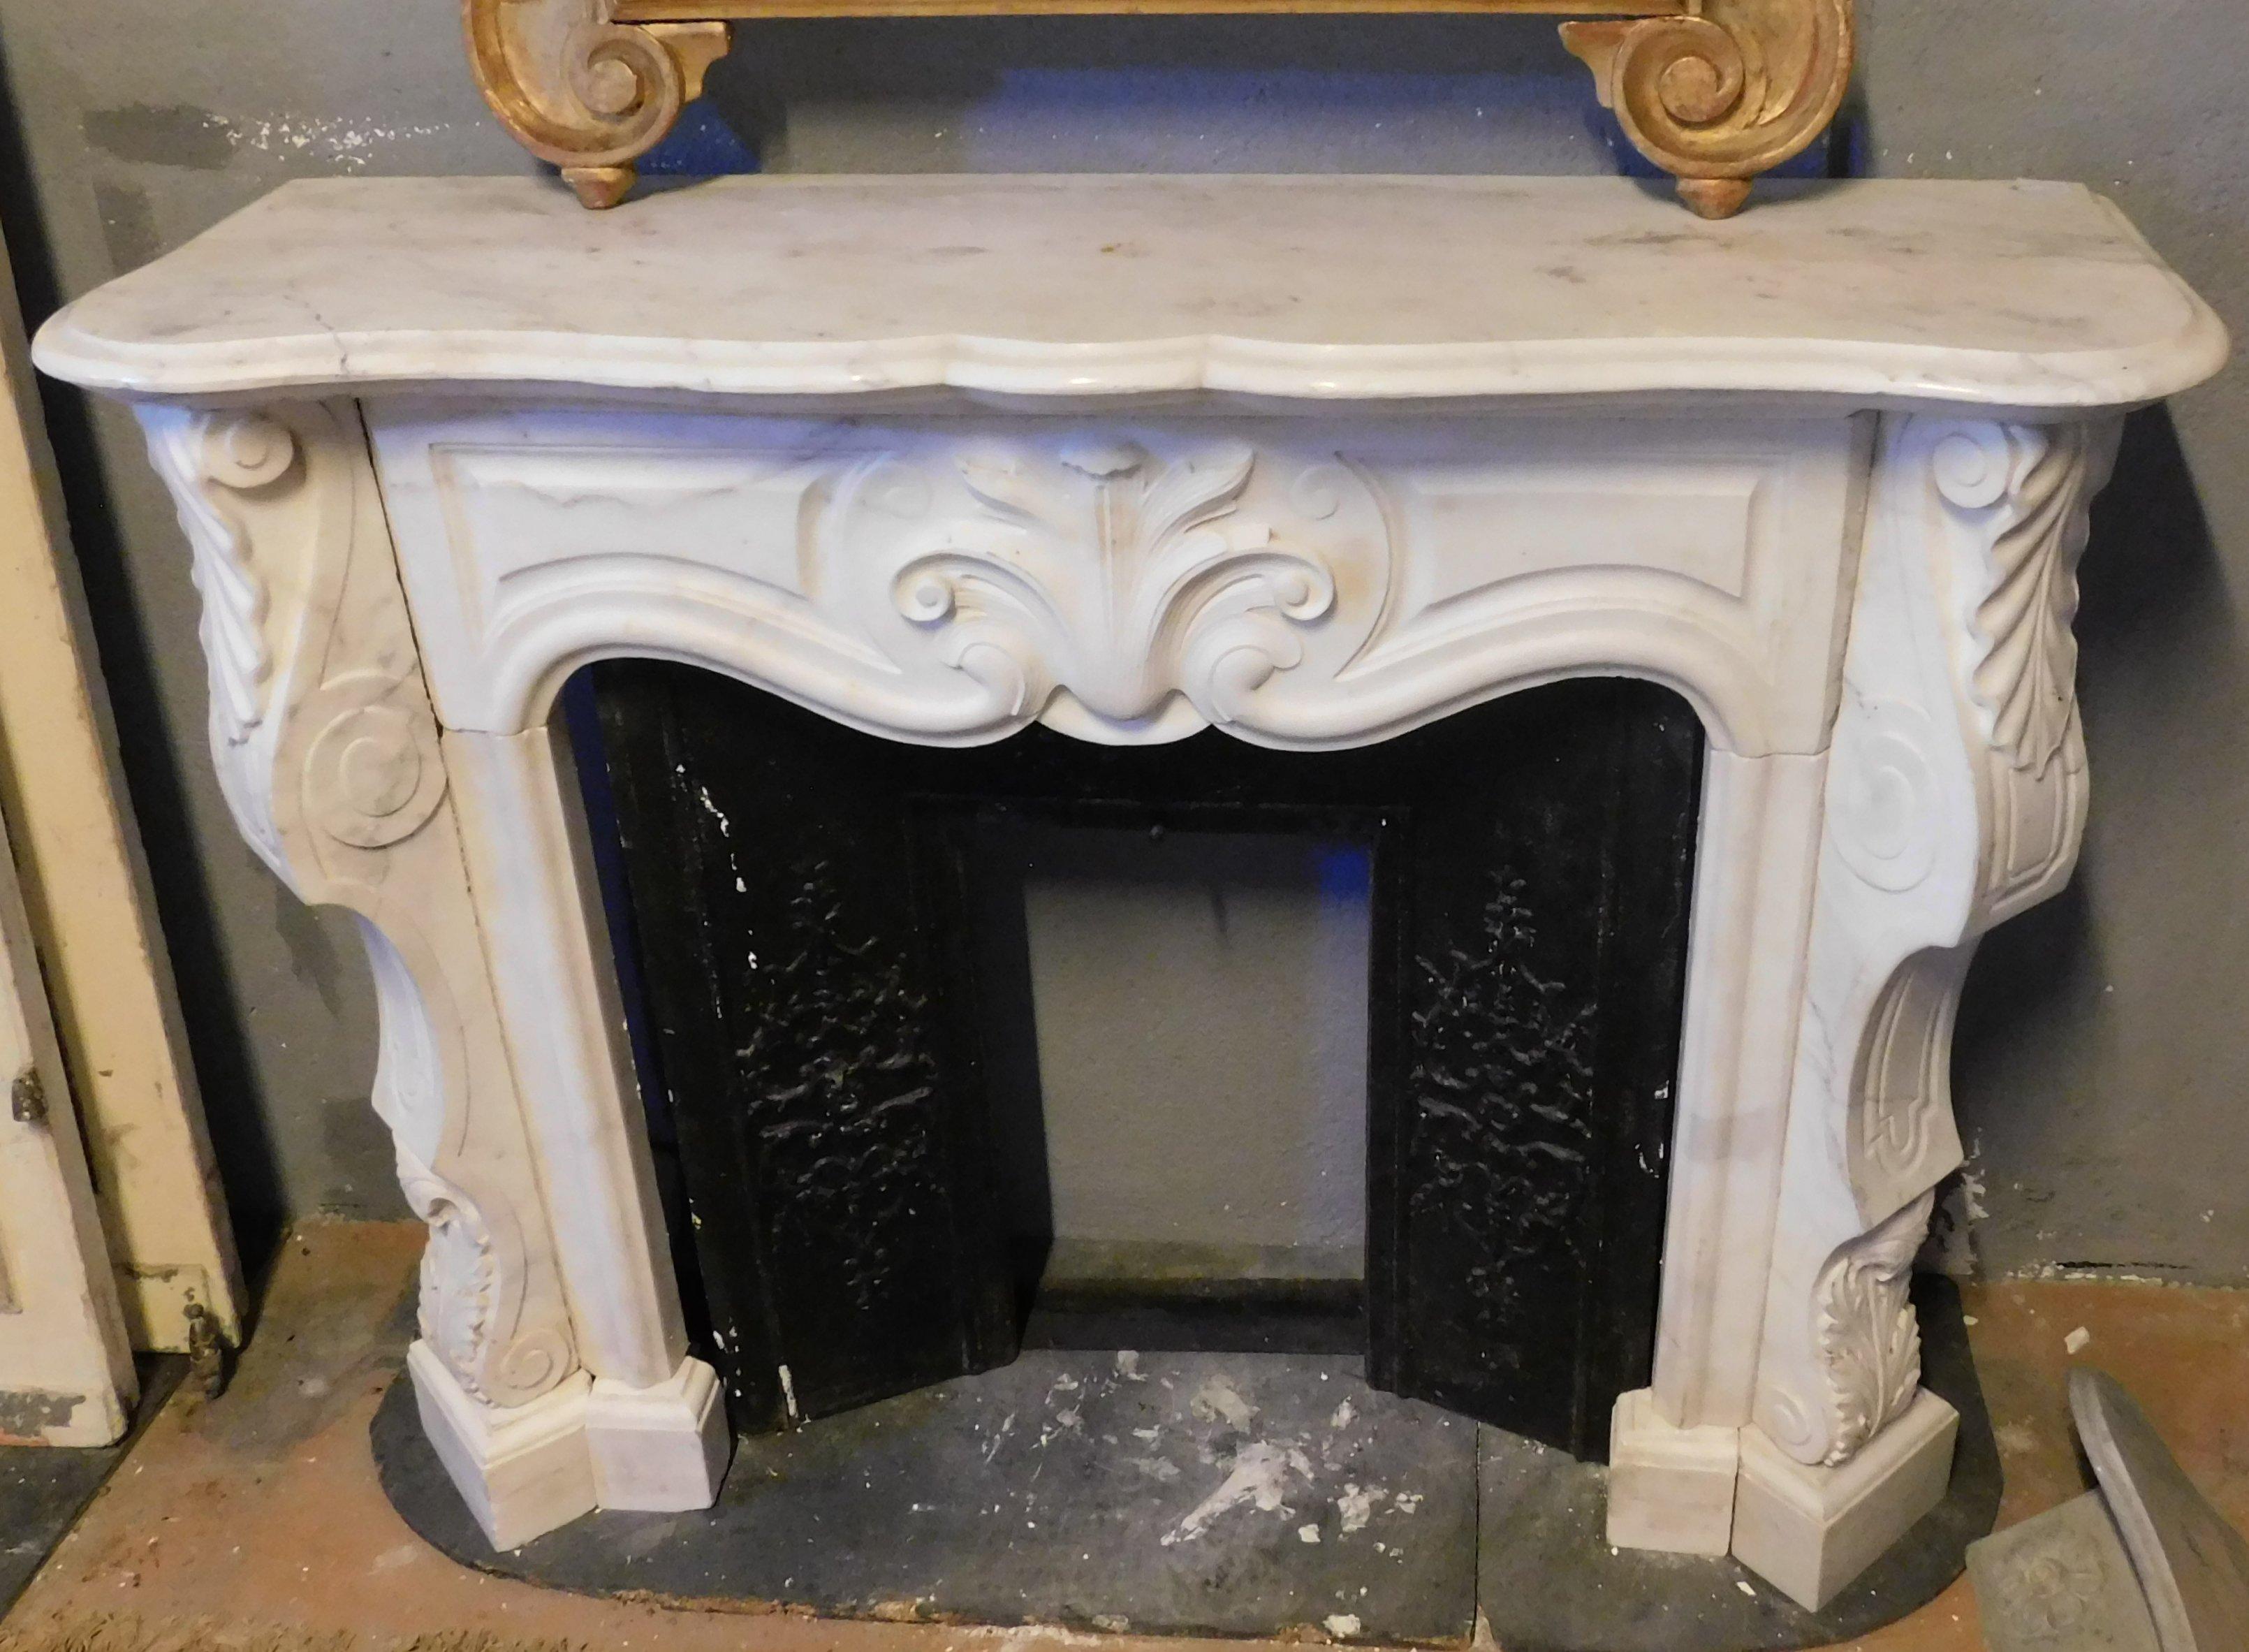 Antique fireplace mantle in white Carrara marble, richly carved both in the pediment and on the sides, built and sculpted by hand in the 19th century for an important building in northern Italy.
Very decorative and of great scenic effect, ideal for